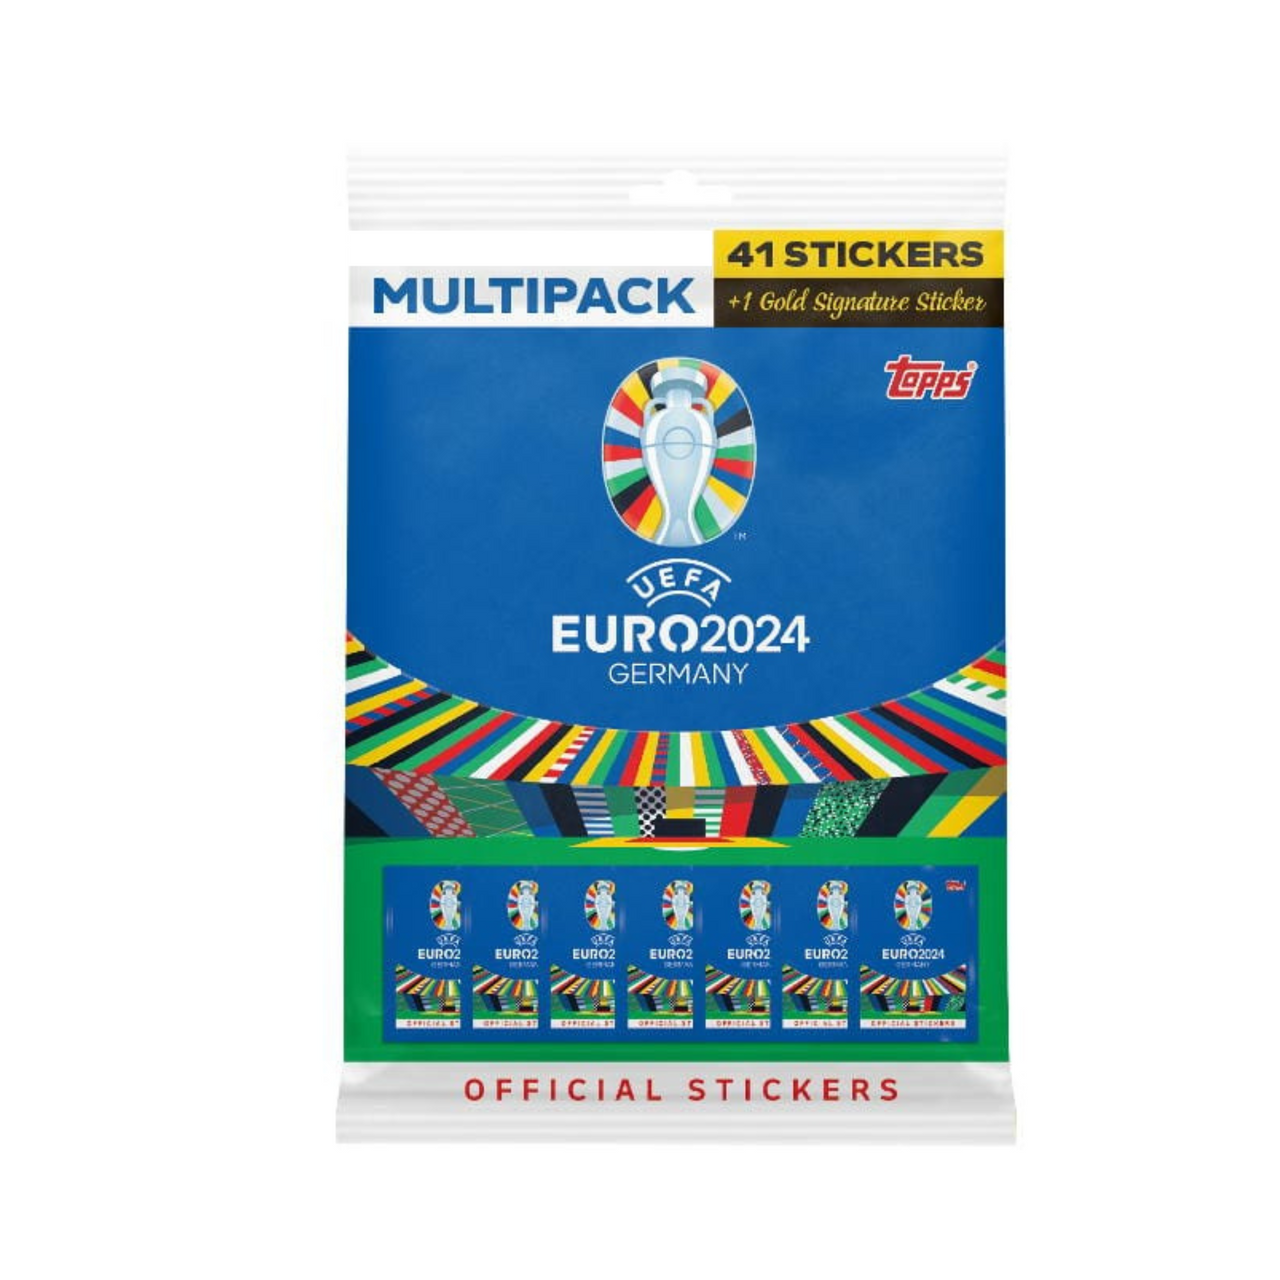 Topps - UEFA Euro 2024 - Multipack STICKERS